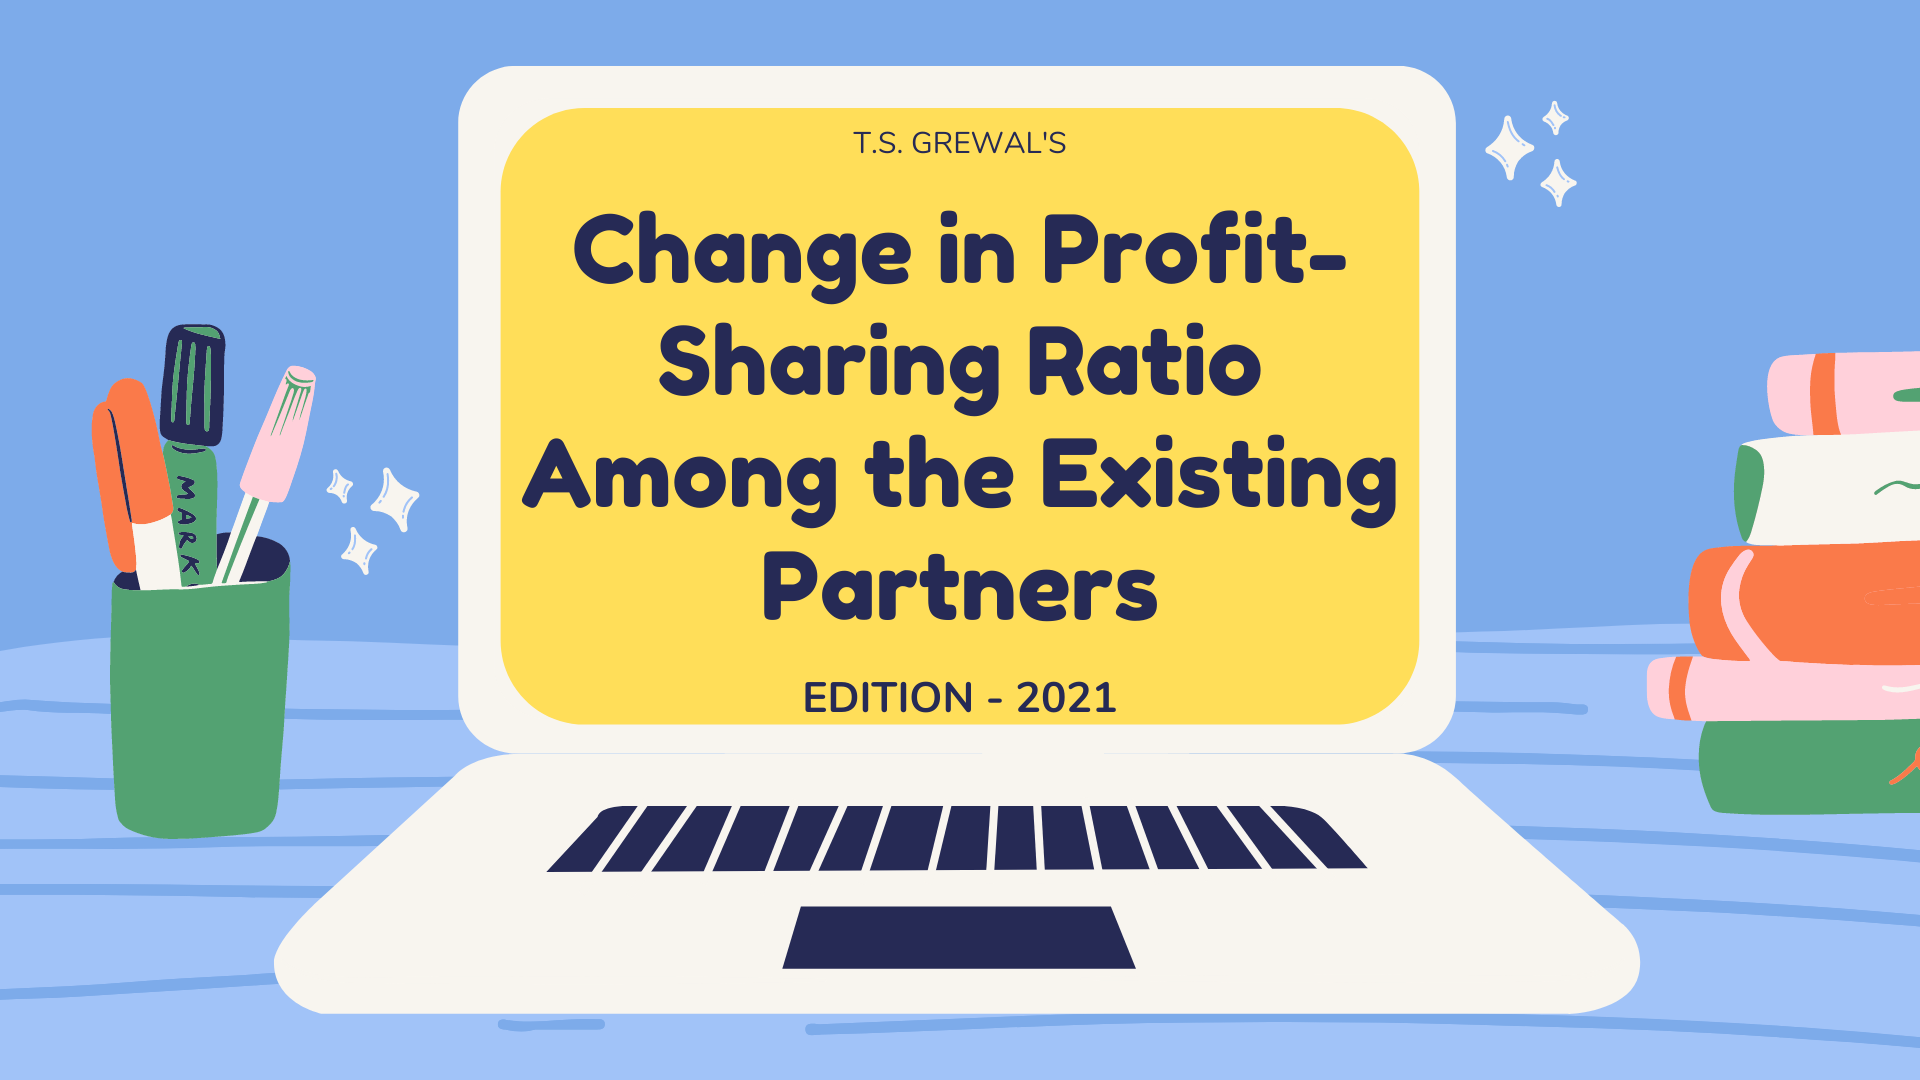 Change in Profit Sharing Ratio Solutions edition 2021